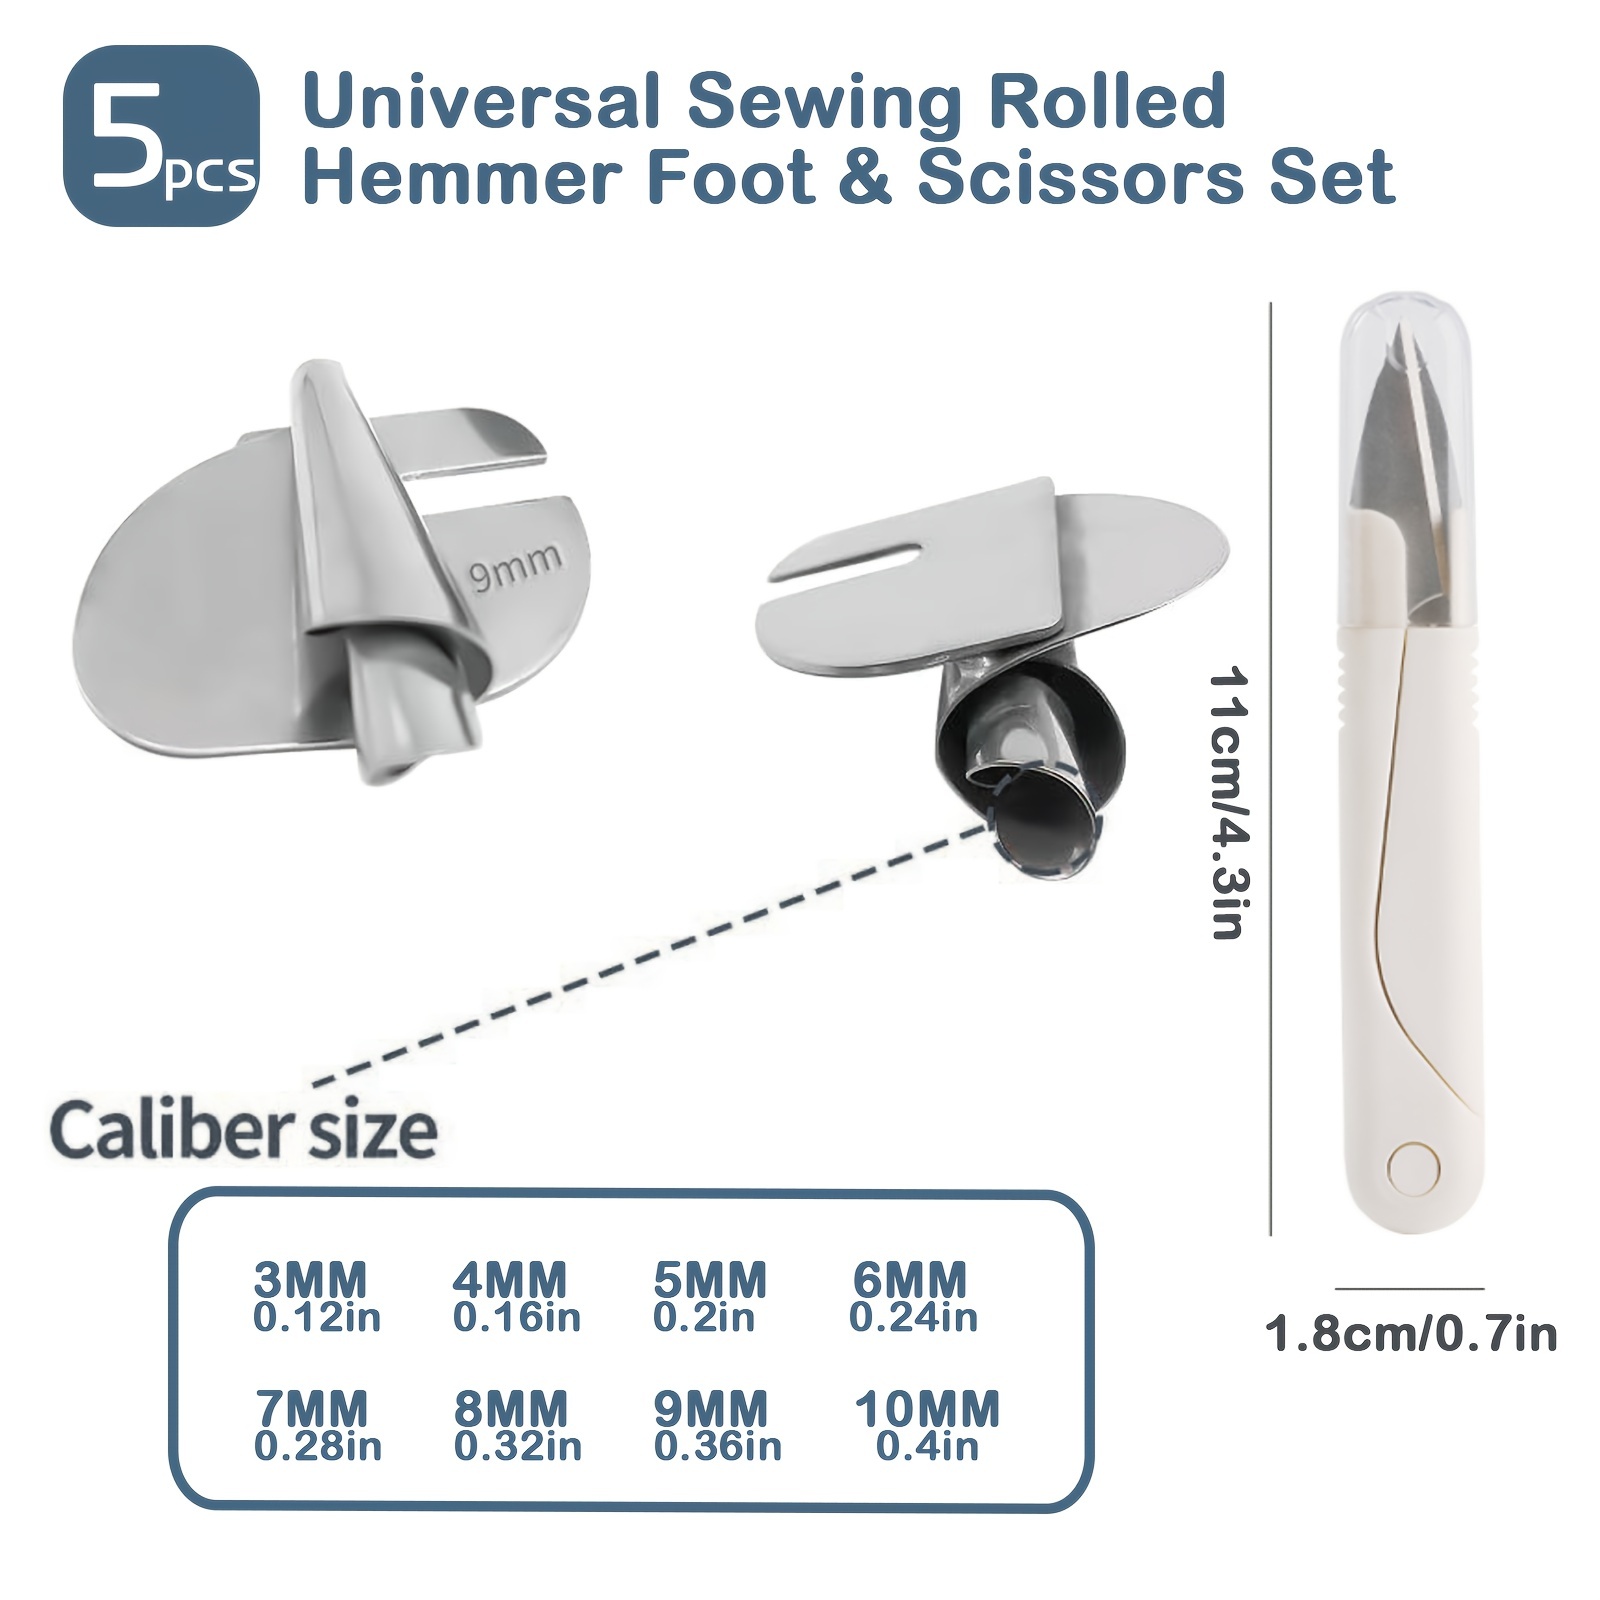 8 Pcs Sewing Rolled Hemmer Foot, 3mm-10mm 8 Sizes Wide Rolled Hem Pressure  Foot Universal Sewing Rolled Hemmer Foot Set Home Industrial Curved Scroll